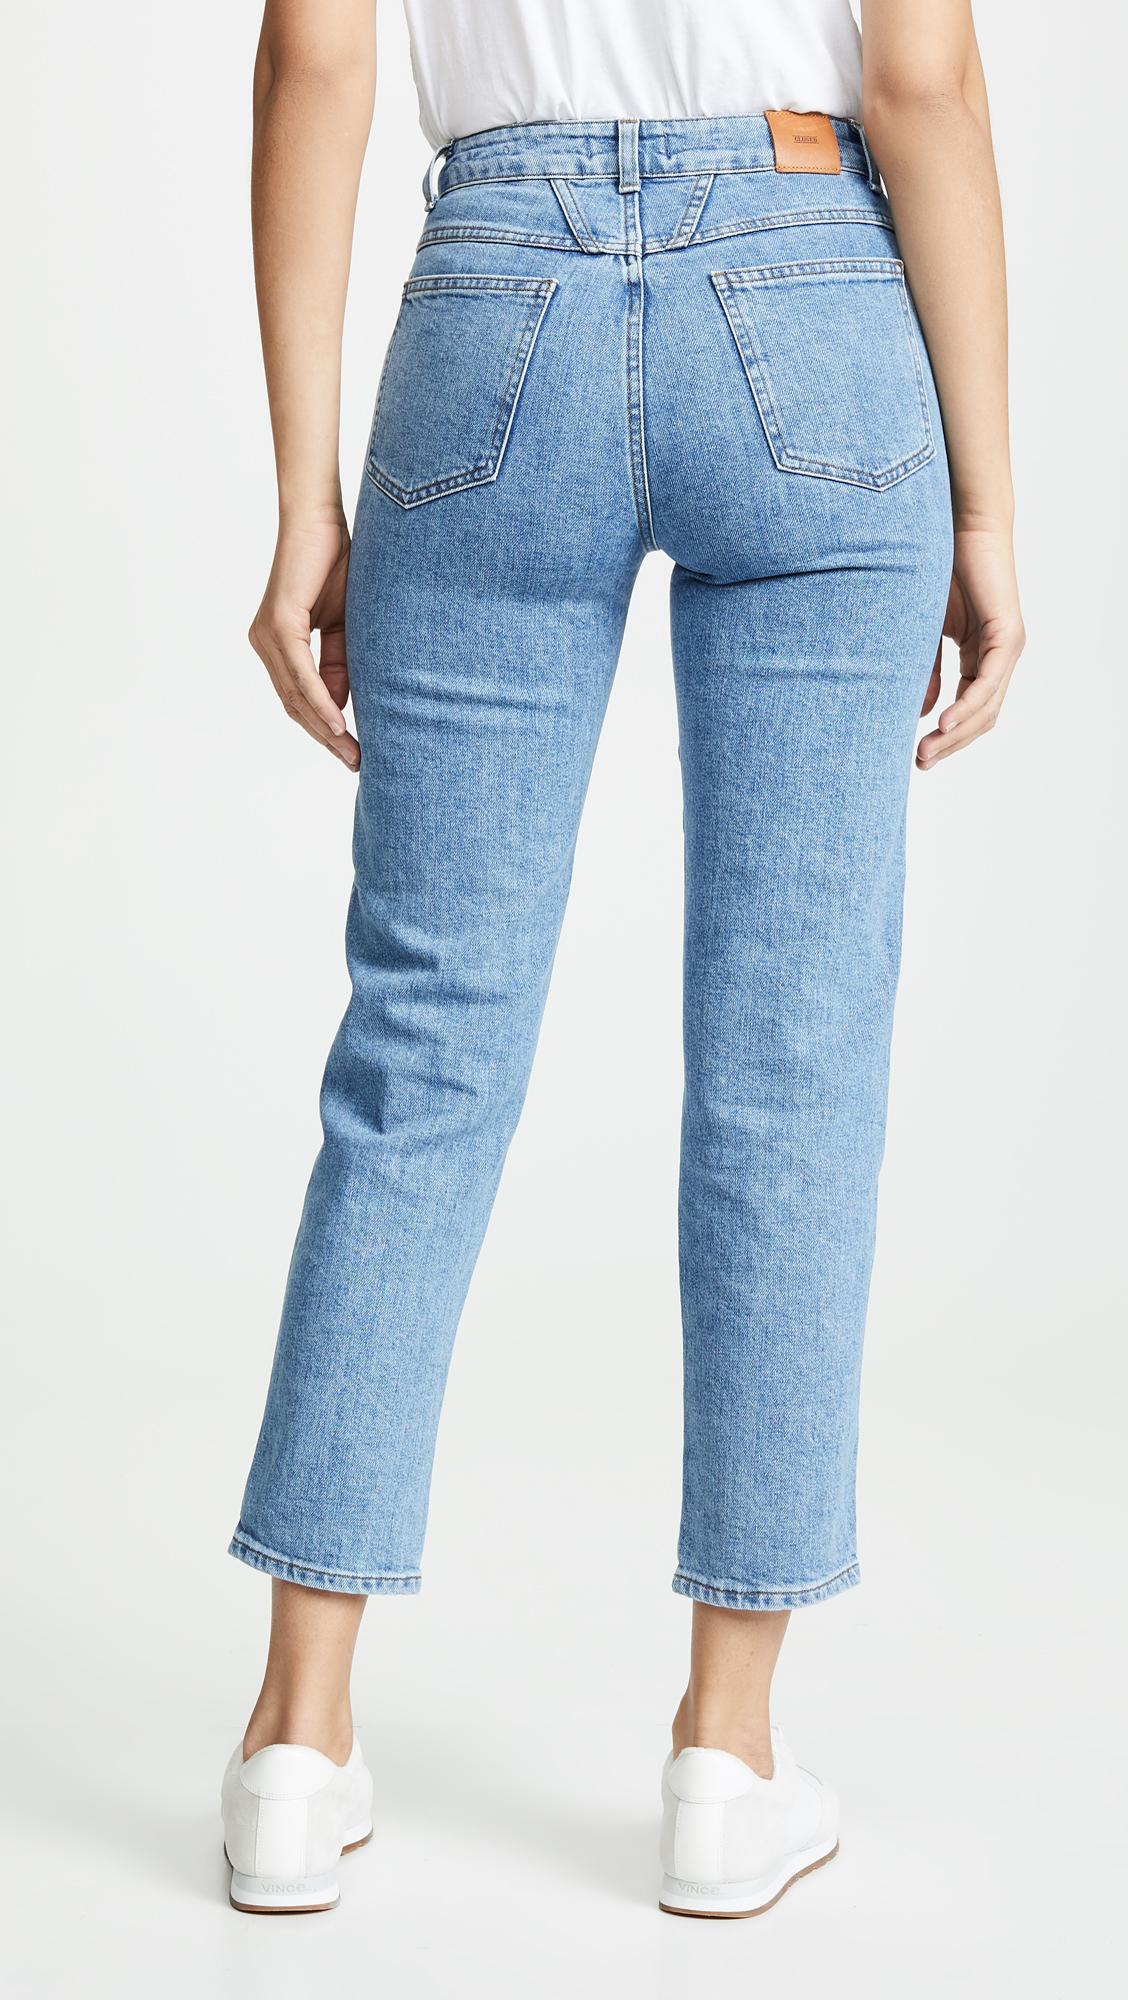 Closed Denim Pedal Pusher Jeans in Mid Blue (Blue) - Lyst